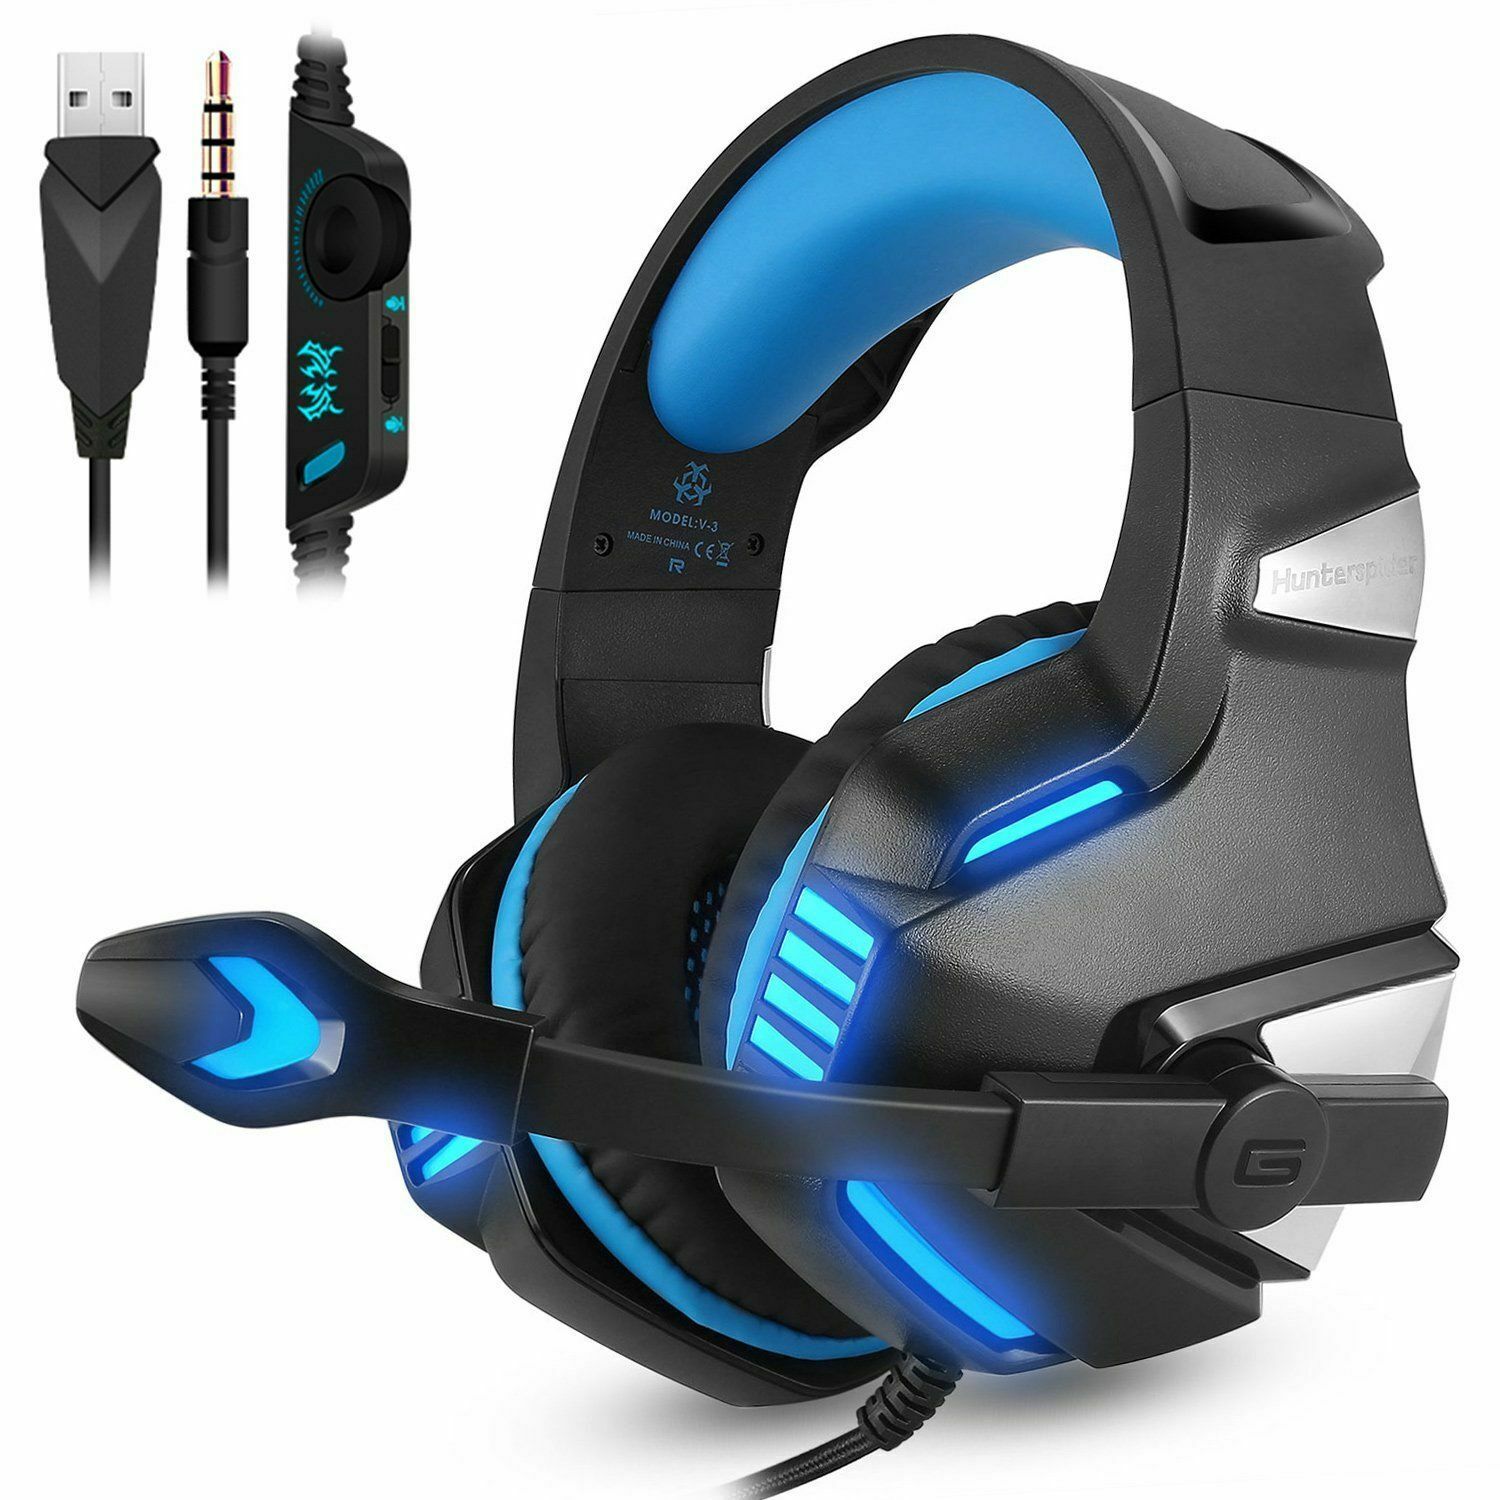 3.5mm Gaming Headset MIC LED Headphones Stereo for PC PS4 Slim Pro Xbox one X S blue